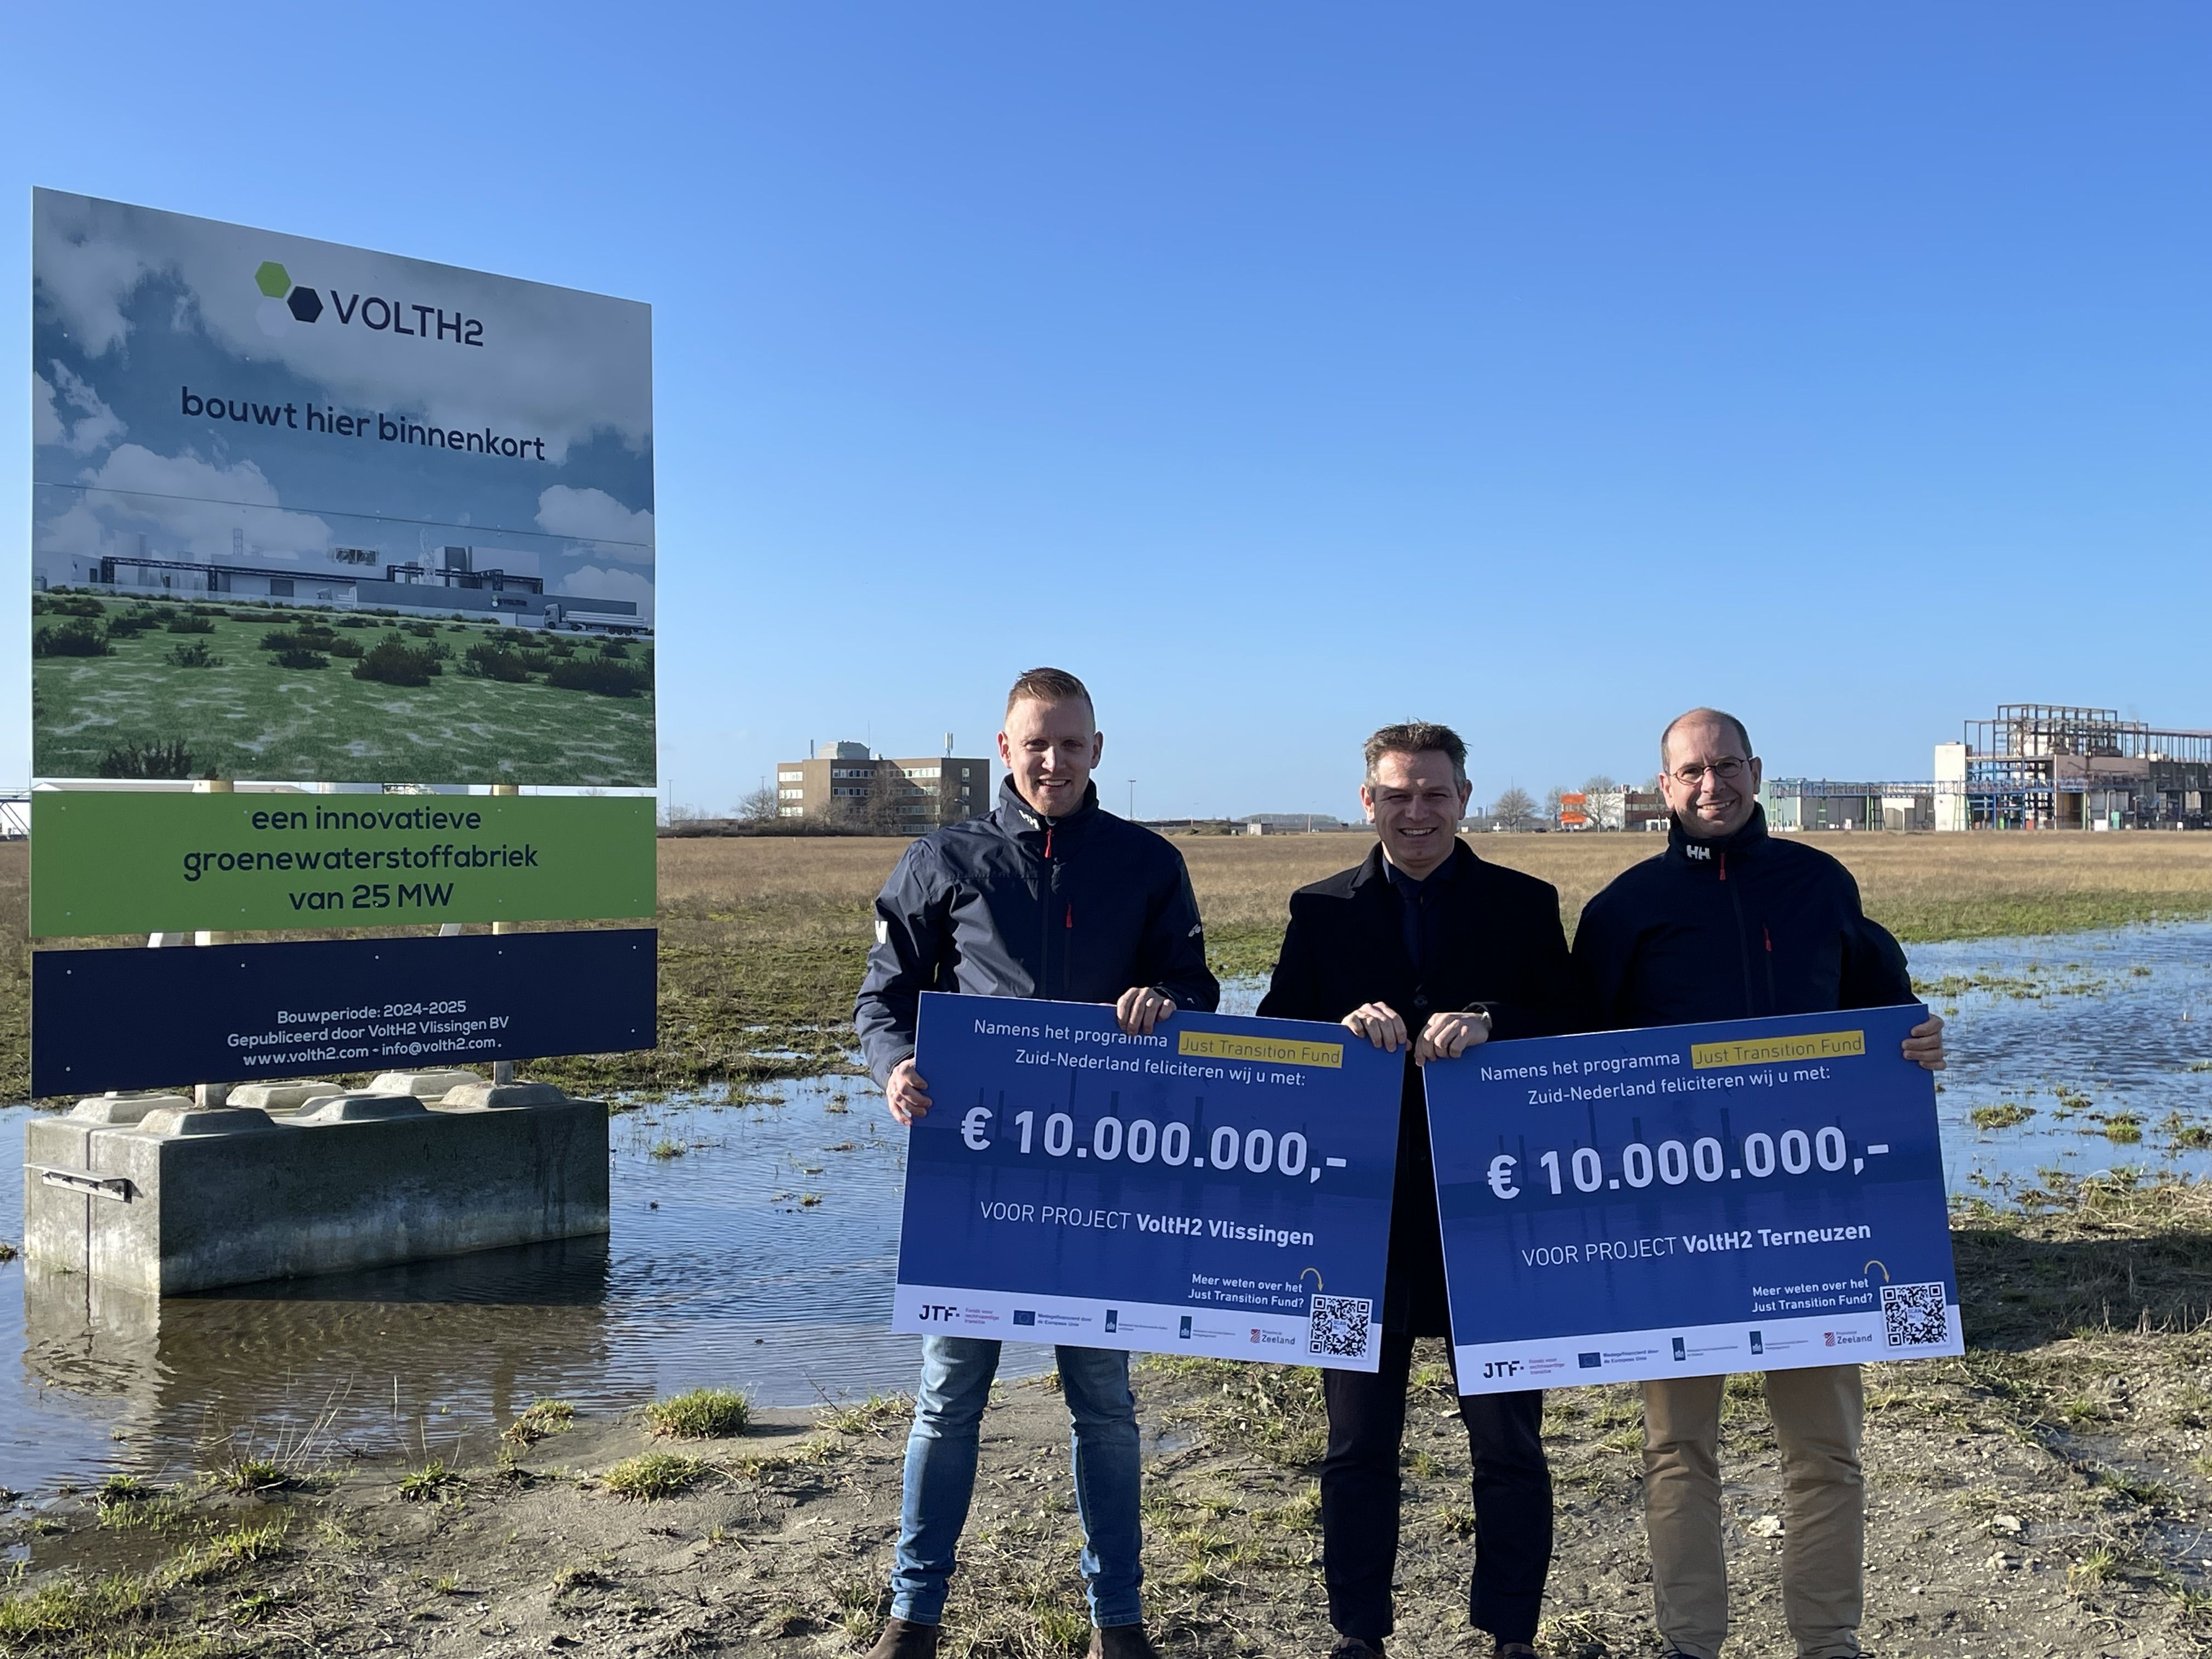 From left to right: Arjan Schipaanboord (Project Manager VoltH2), Jo-Annes de Bat (Deputy of the Province of Zeeland) and Gerwin Hament (Director Operations VoltH2)